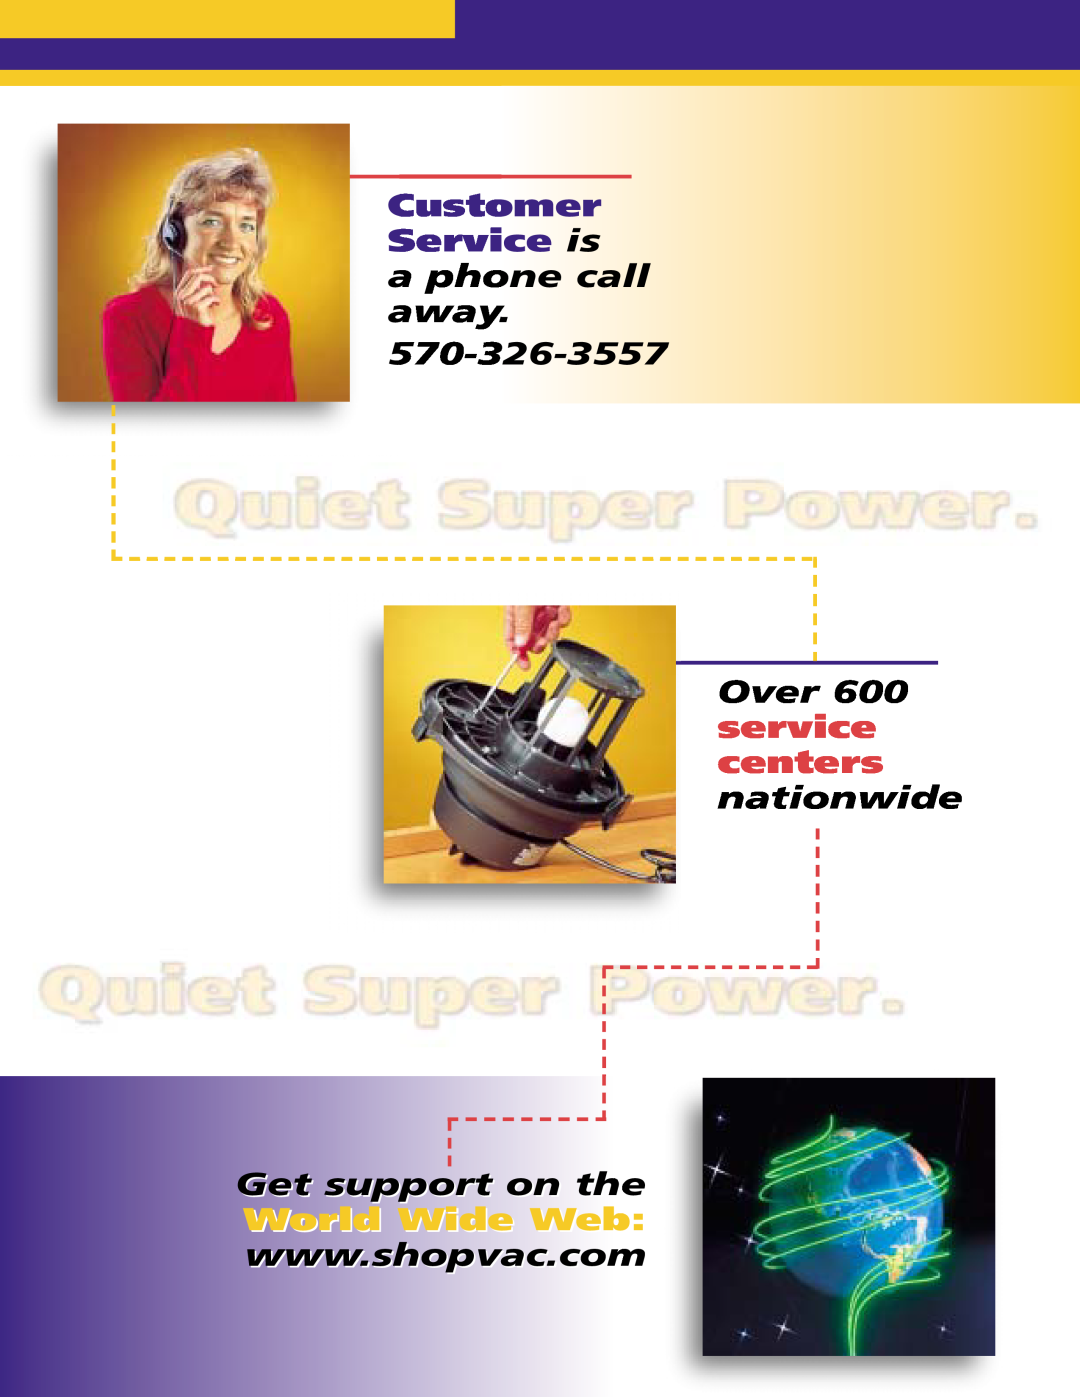 Shop-Vac QSP Series manual Customer Service is a phone call away, Over 600 service centers nationwide 